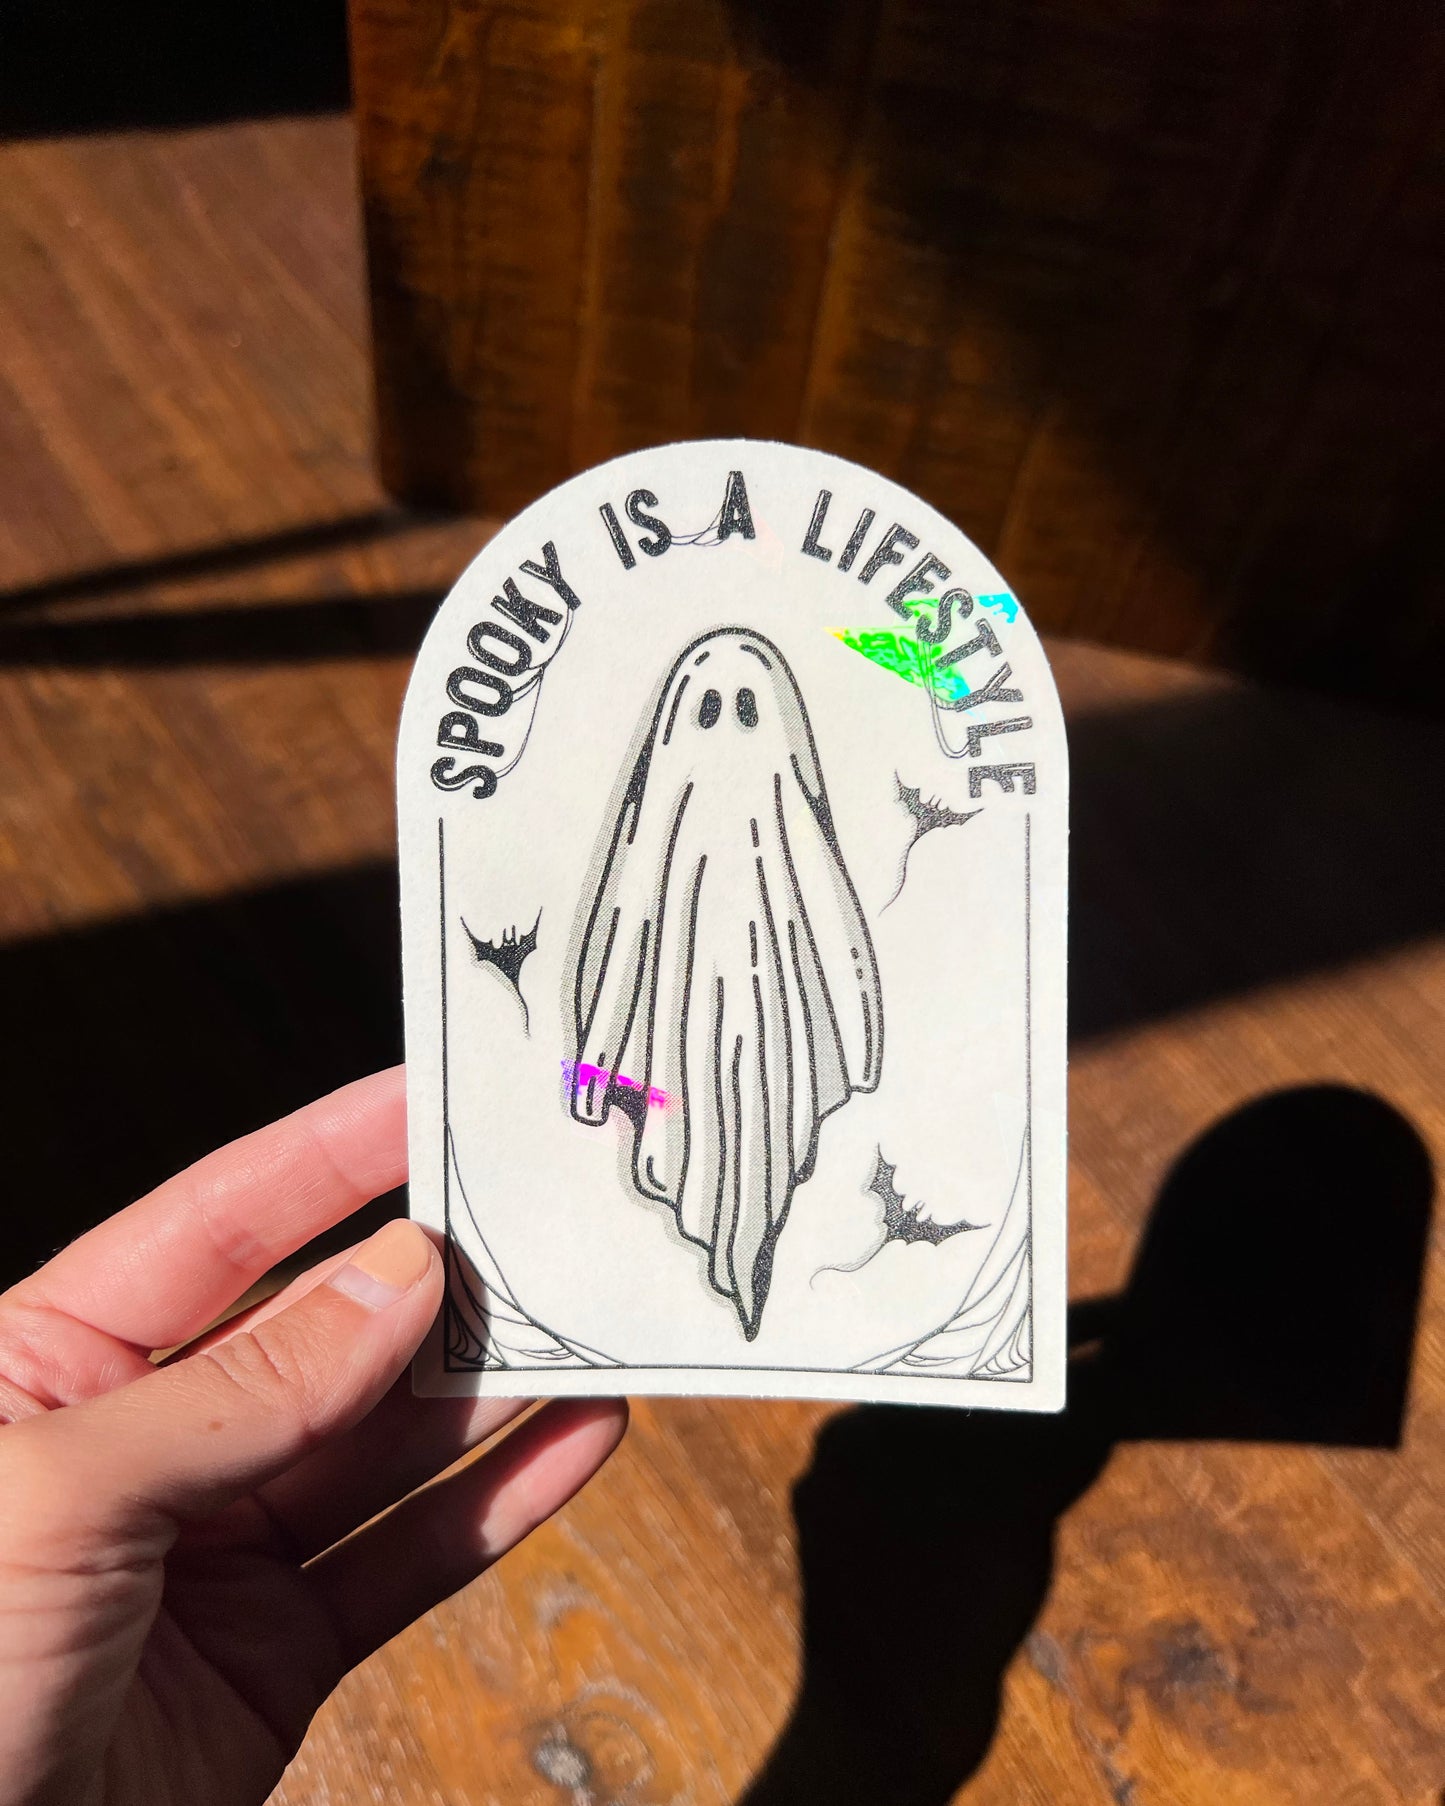 Spooky Is A Lifestyle Window Cling